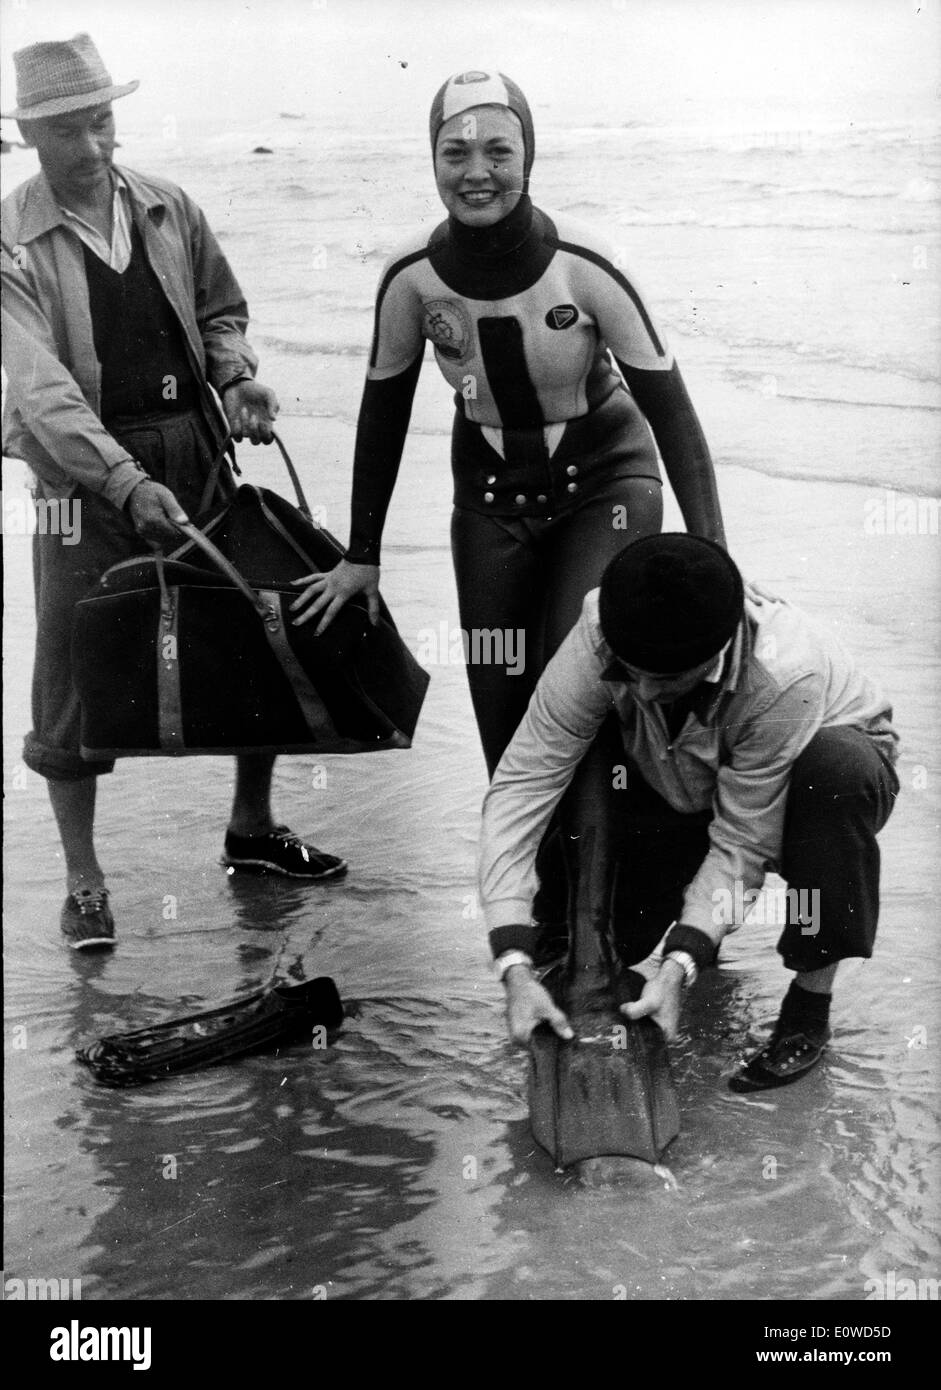 Jane Baldasare coming out of the water after scuba diving Stock Photo